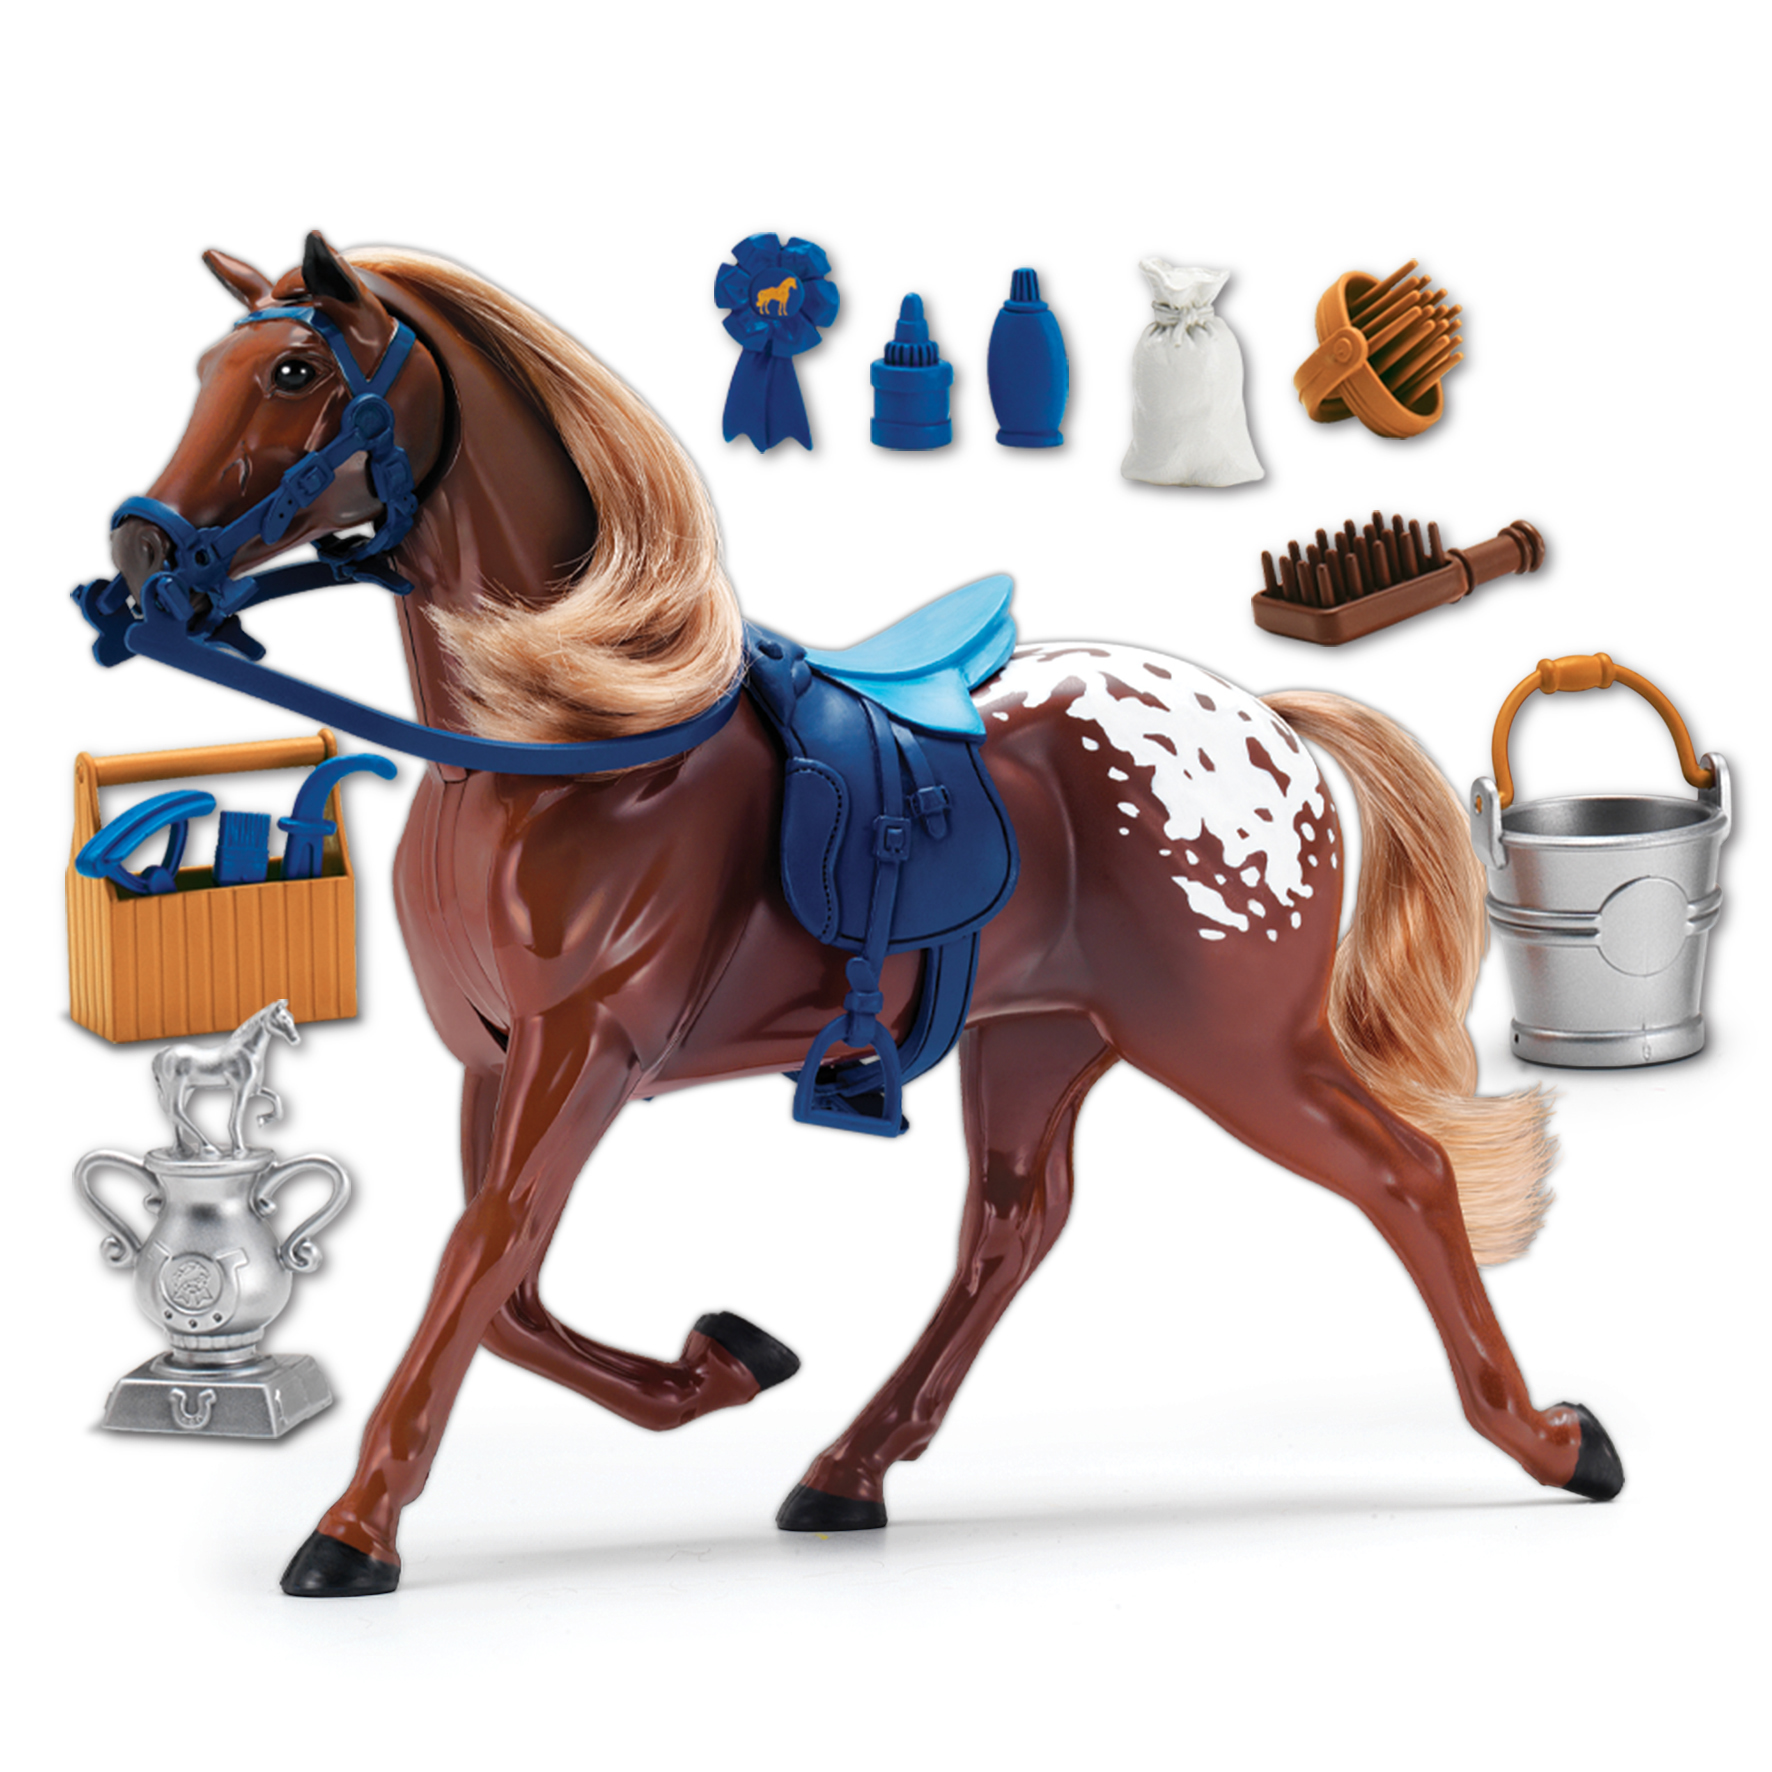 Sunny Days Entertainment Blue Ribbon Champions Deluxe Toy Horses Quarter Horse for sale online 